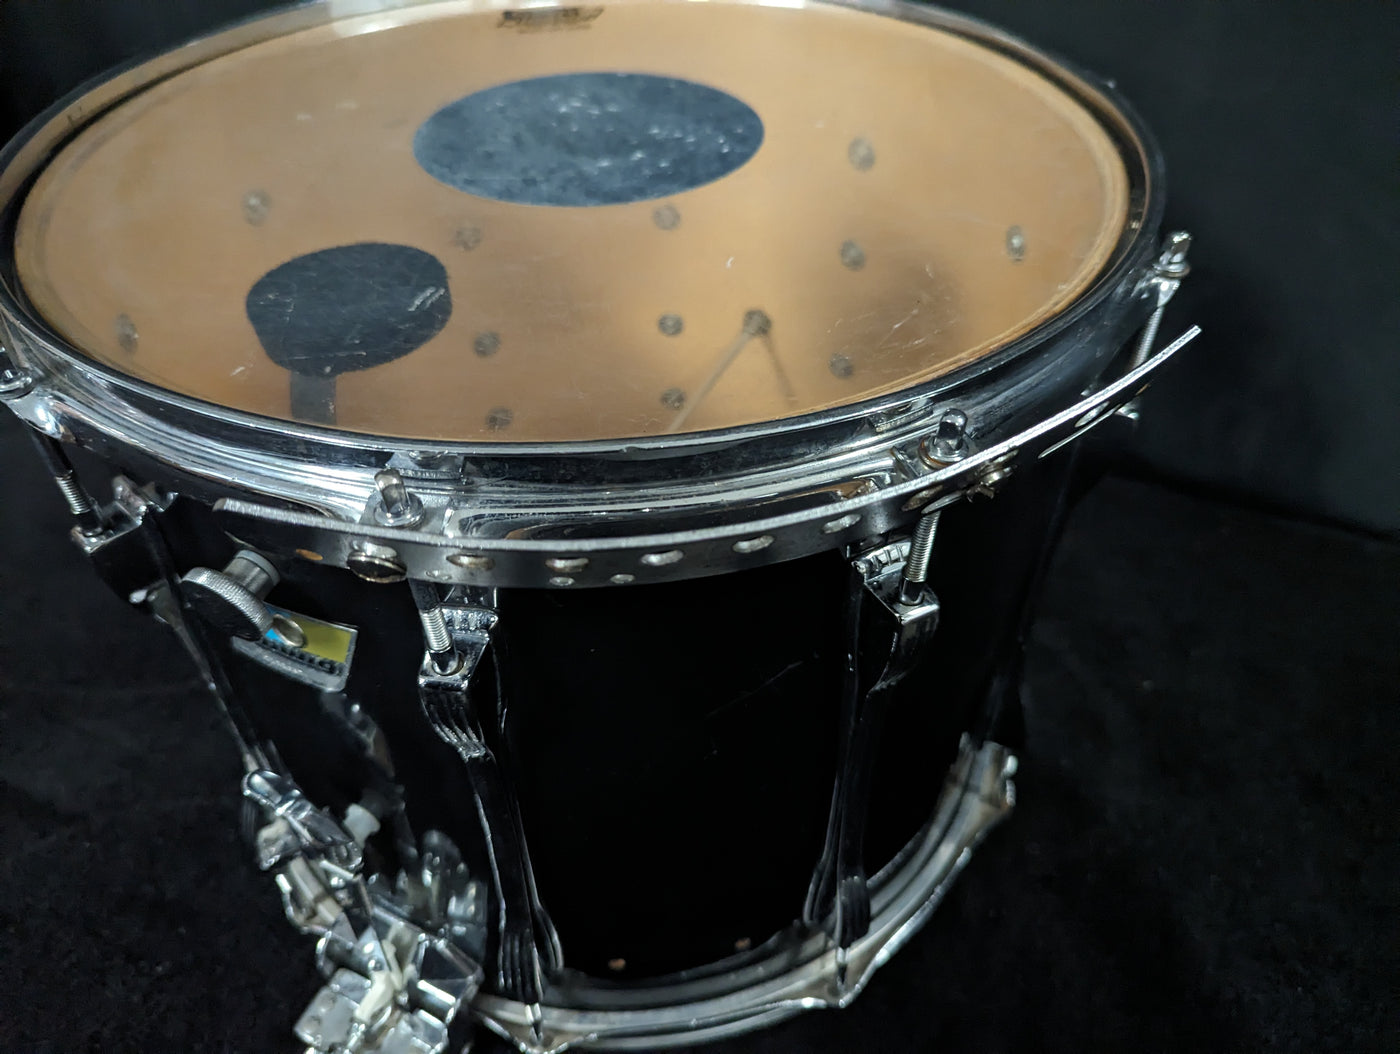 1976 Wood Marching Snare